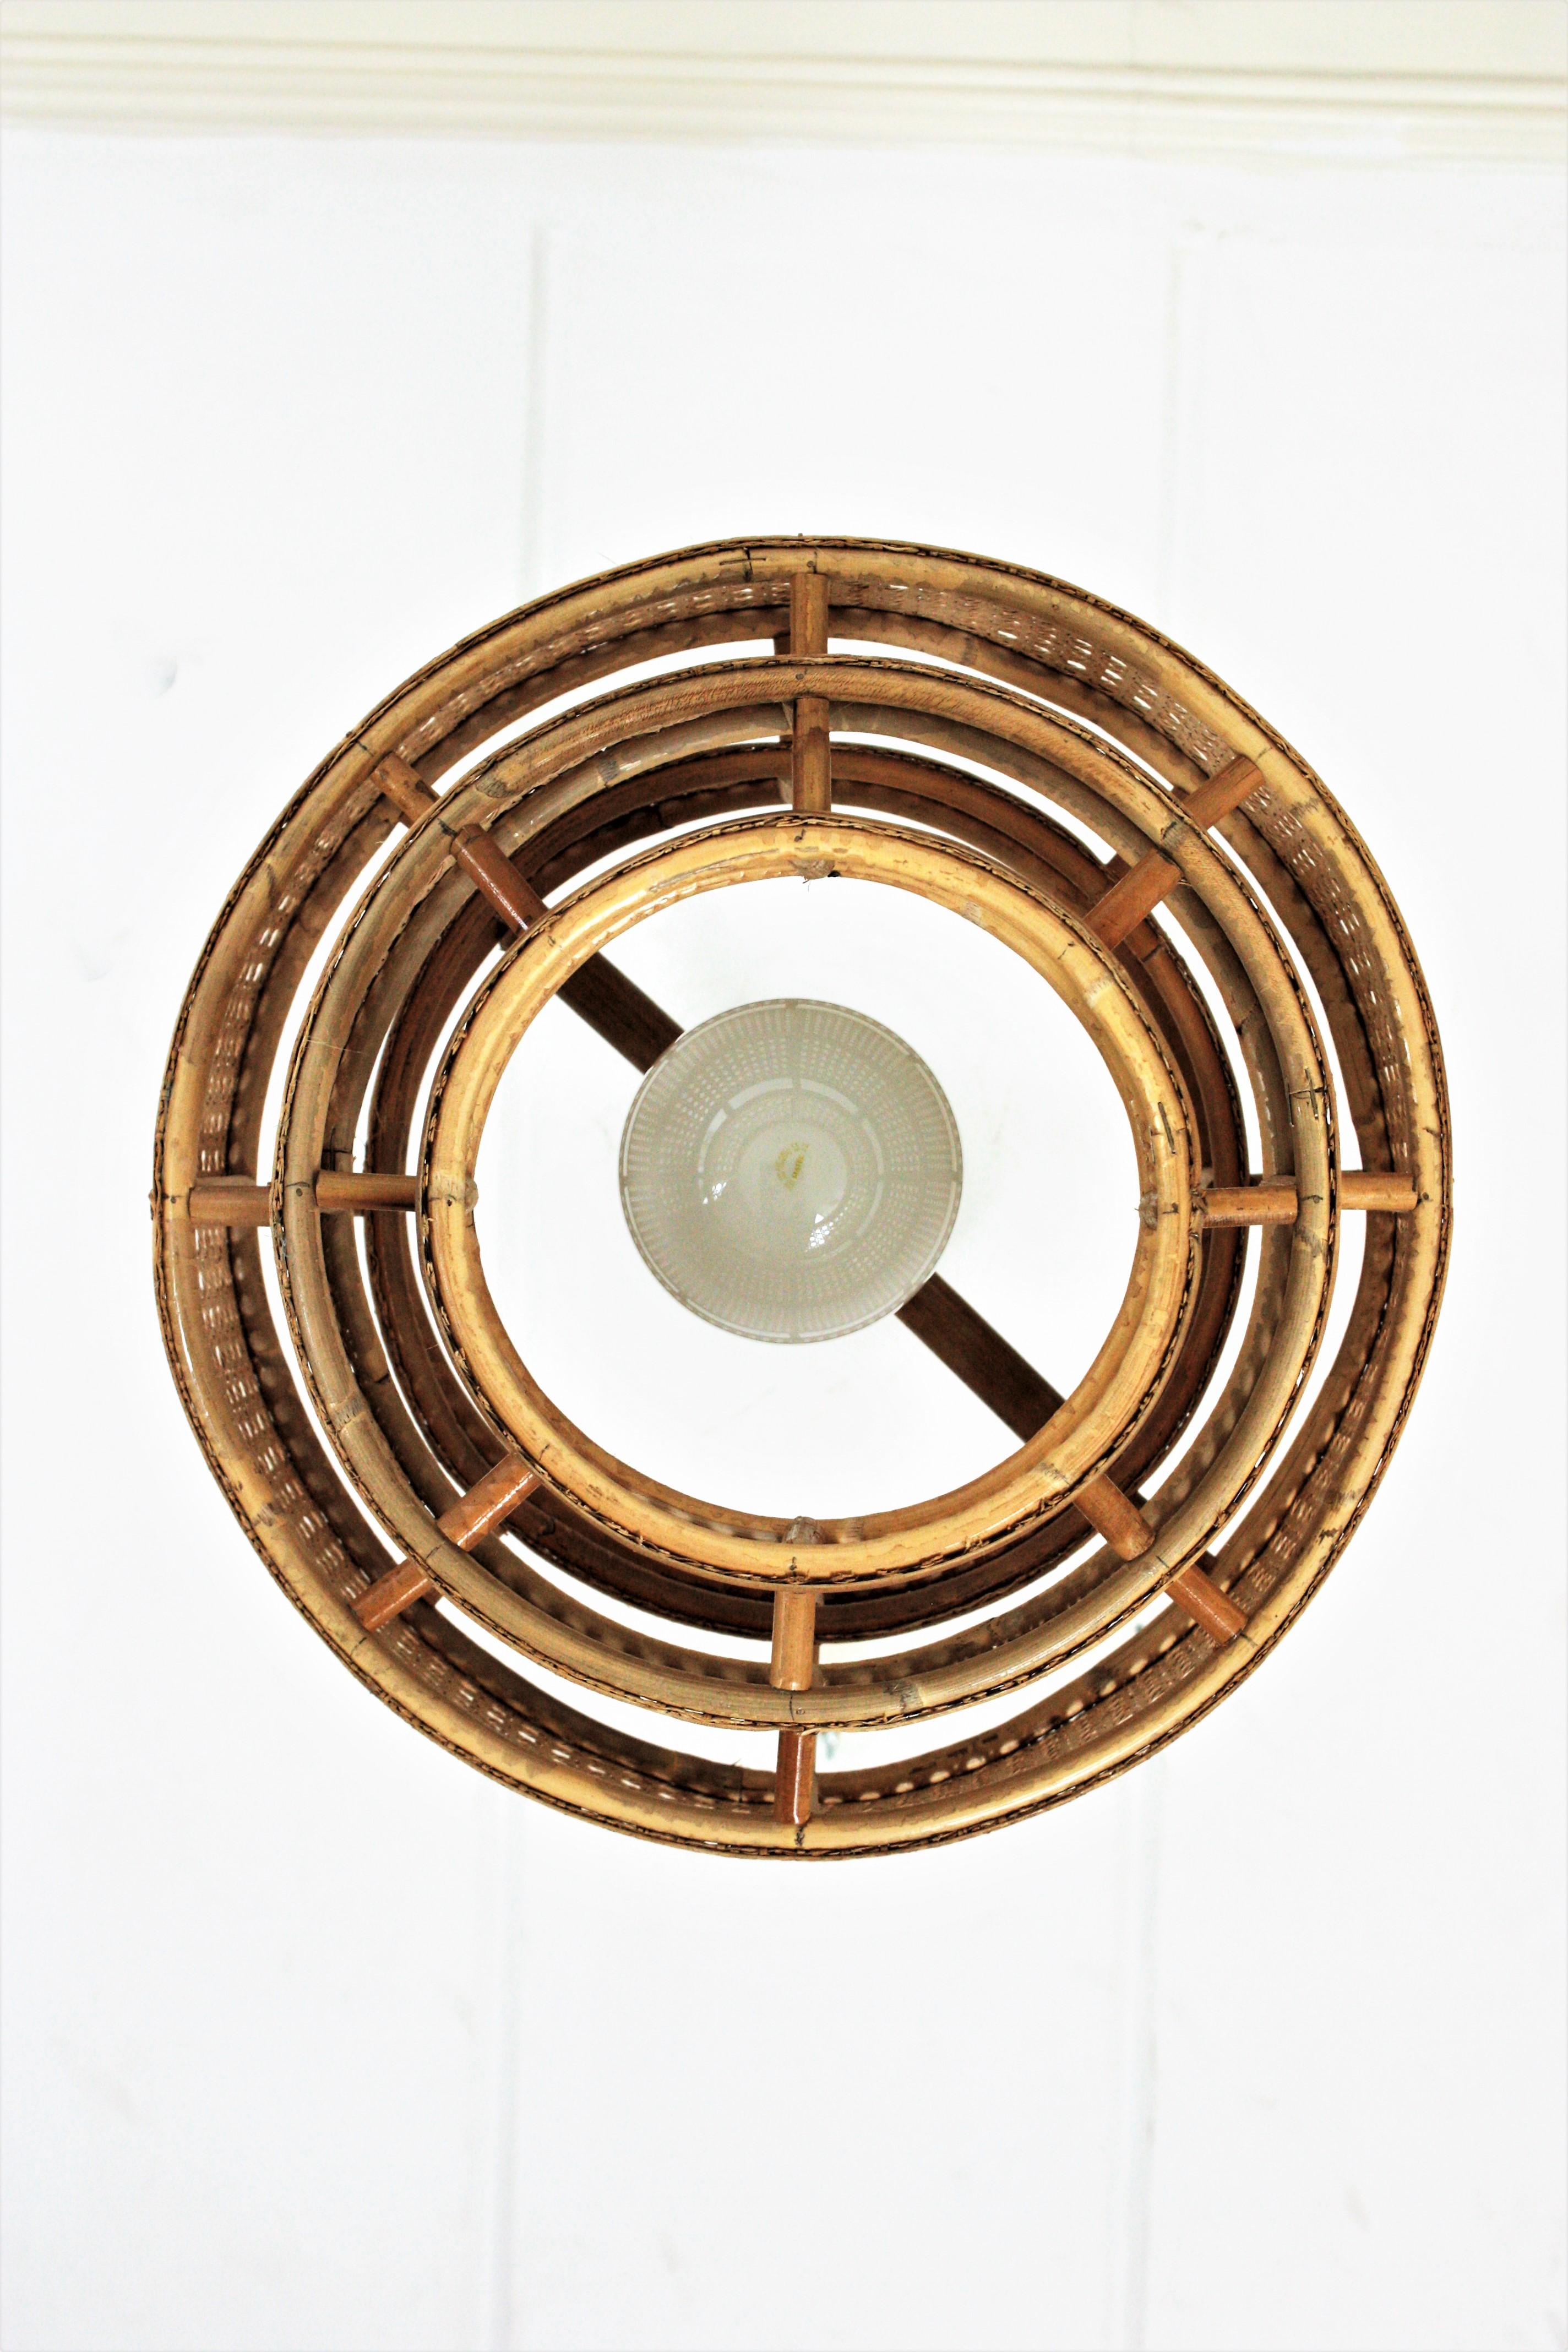  Rattan Wicker Weave Concentric Cylinder Pendant Hanging Light, 1960s For Sale 6